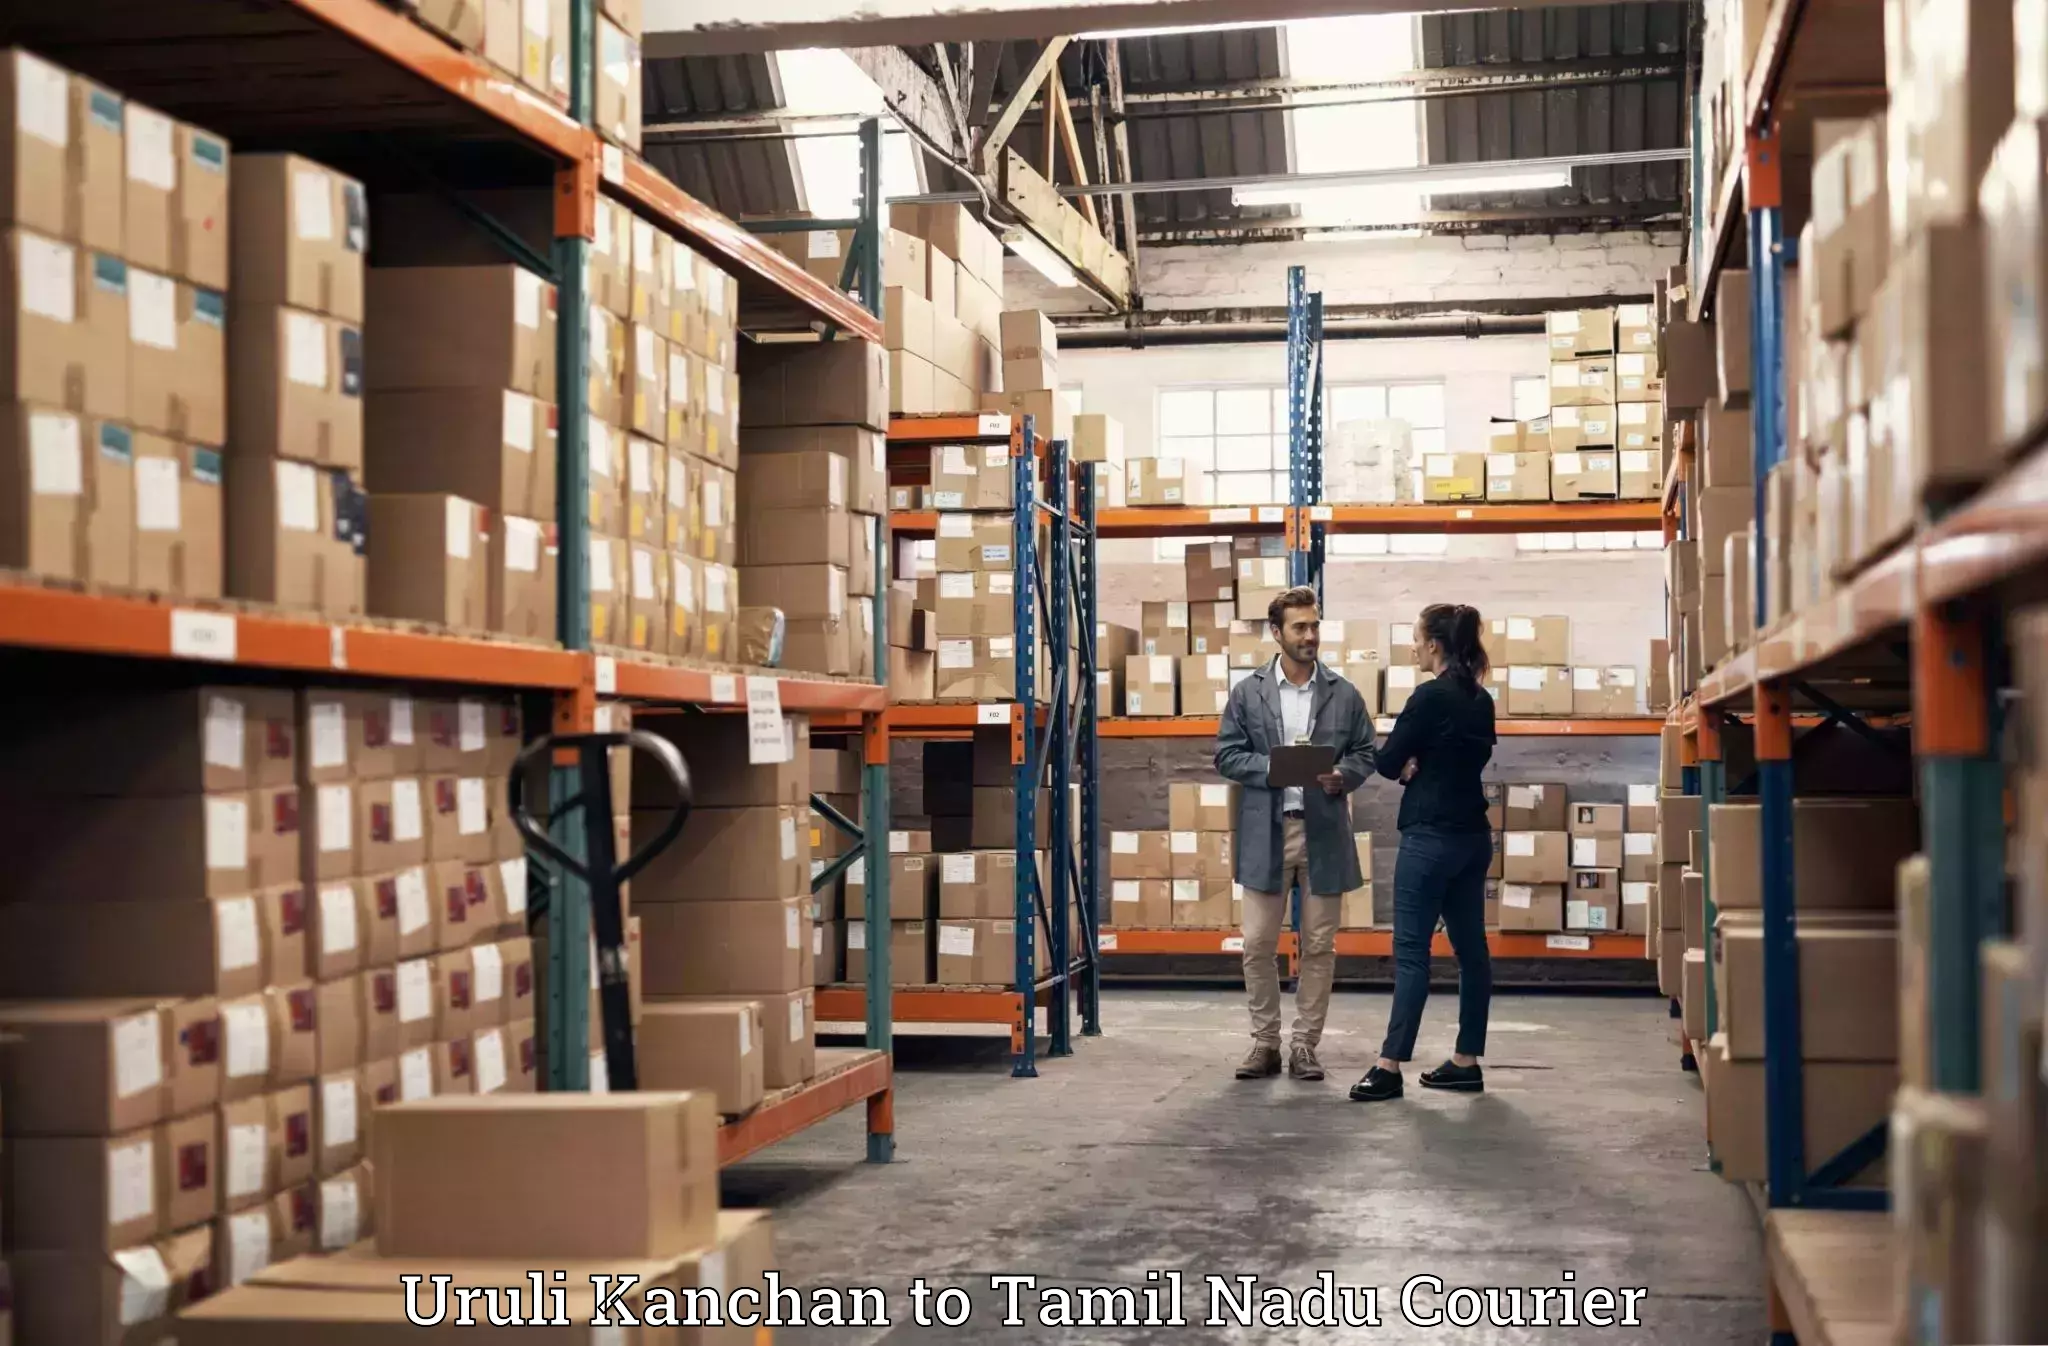 Hassle-free luggage shipping in Uruli Kanchan to Saveetha Institute of Medical and Technical Sciences Chennai